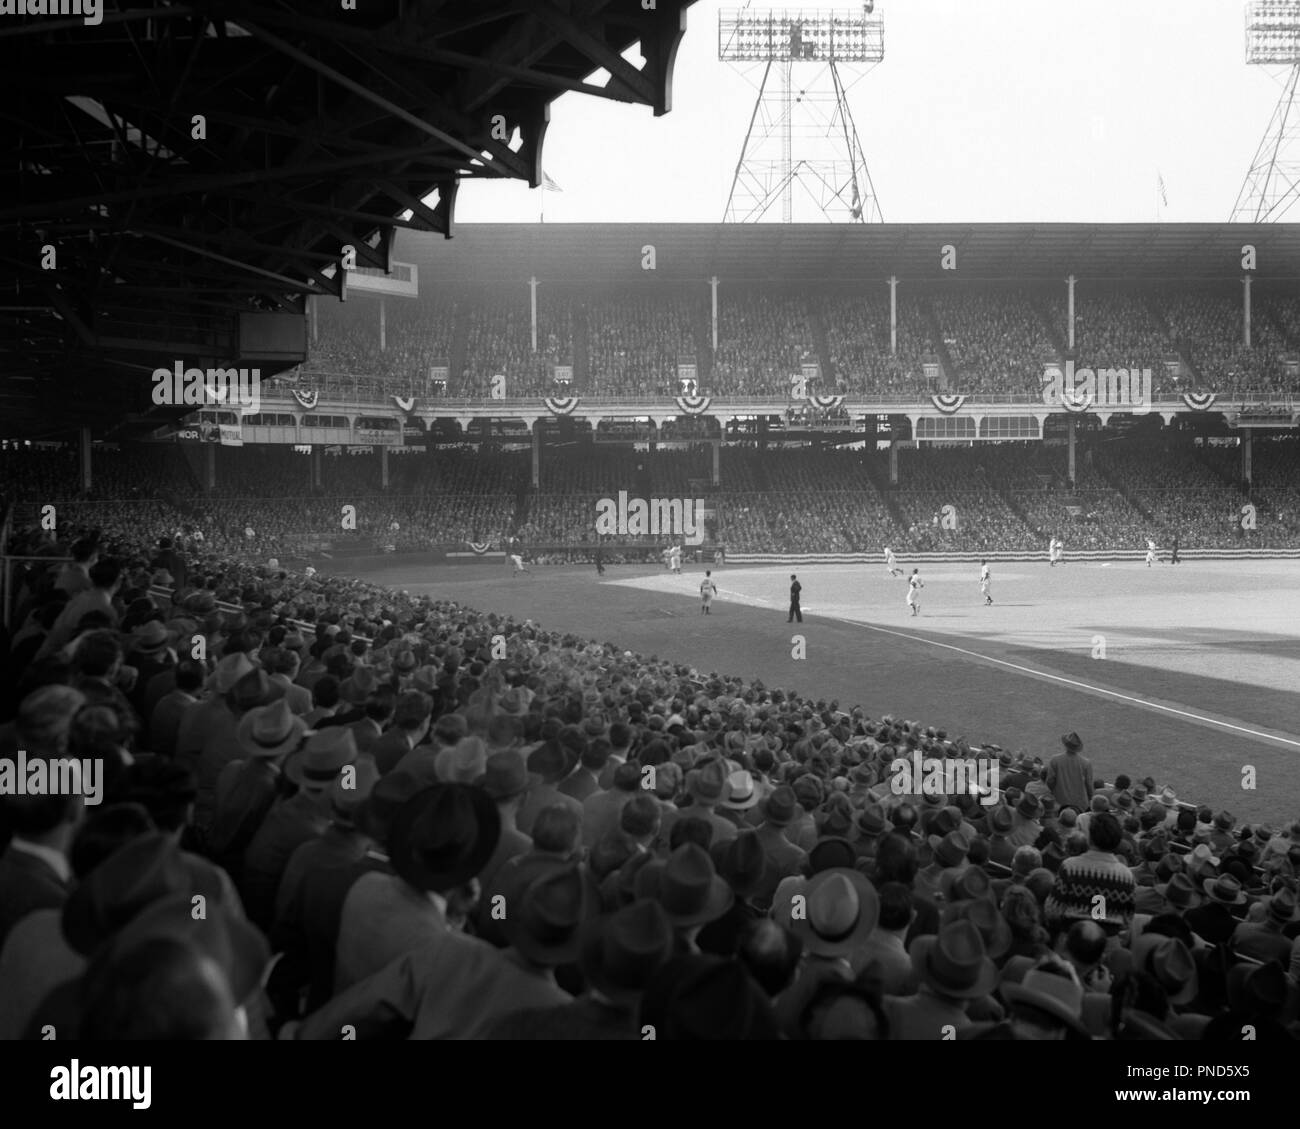 1940s 1947 BASEBALL WORLD SERIES AT EBBETS FIELD NEW YORK CITY SUBWAY SERIES YANKEES VS BROOKLYN DODGERS NYC USA - q47466 CPC001 HARS DODGERS NEW YORK CITY PLAYING FIELD OCTOBER EBBETS FIELD FLATBUSH INFIELD JACKIE ROBINSON SERIES YANKEES BLACK AND WHITE MAJOR LEAGUE OLD FASHIONED Stock Photo